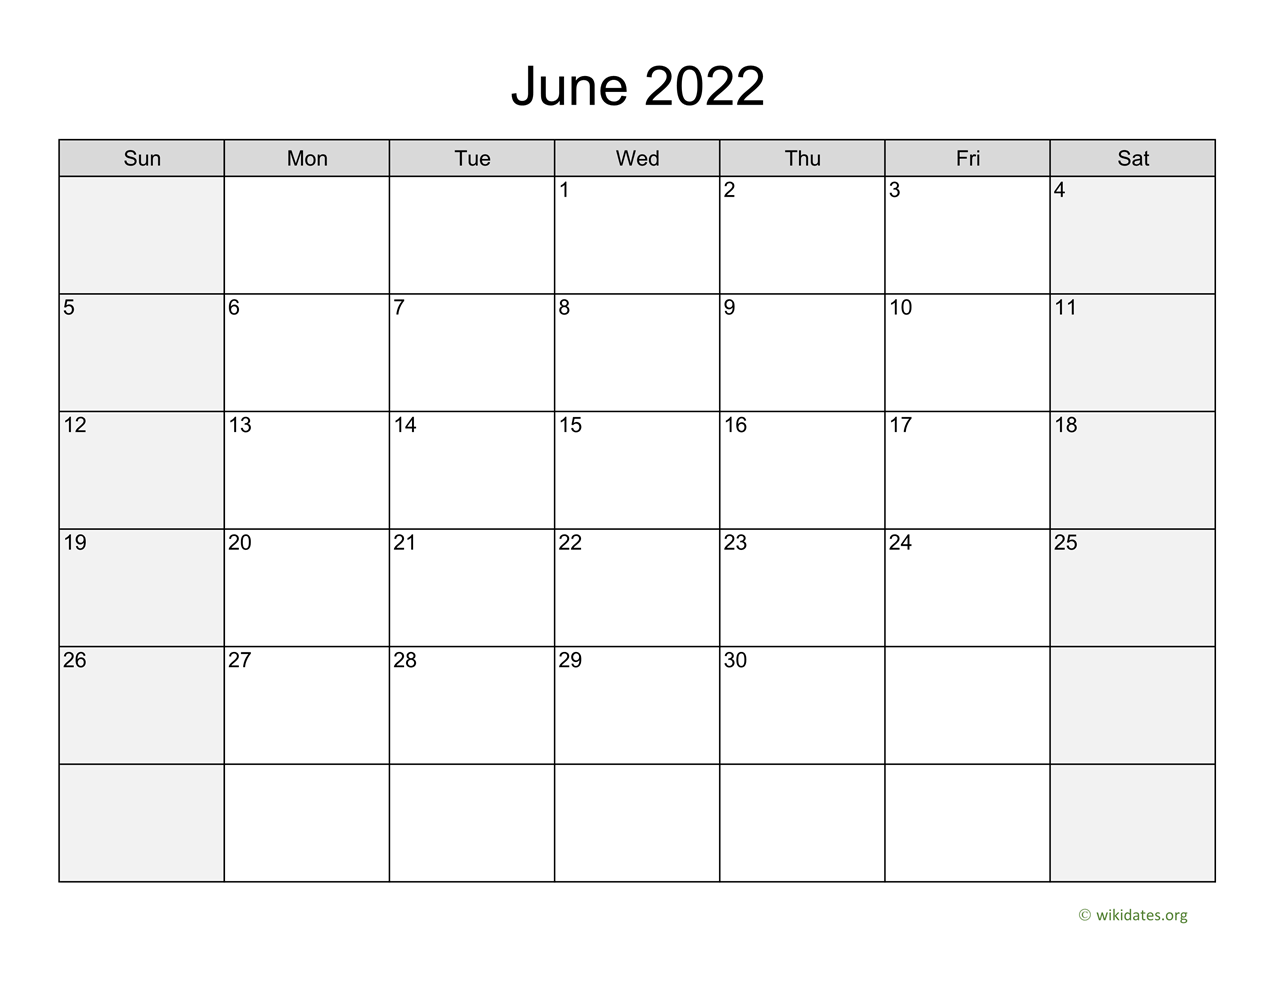 June Calendar with Shaded | WikiDates.org